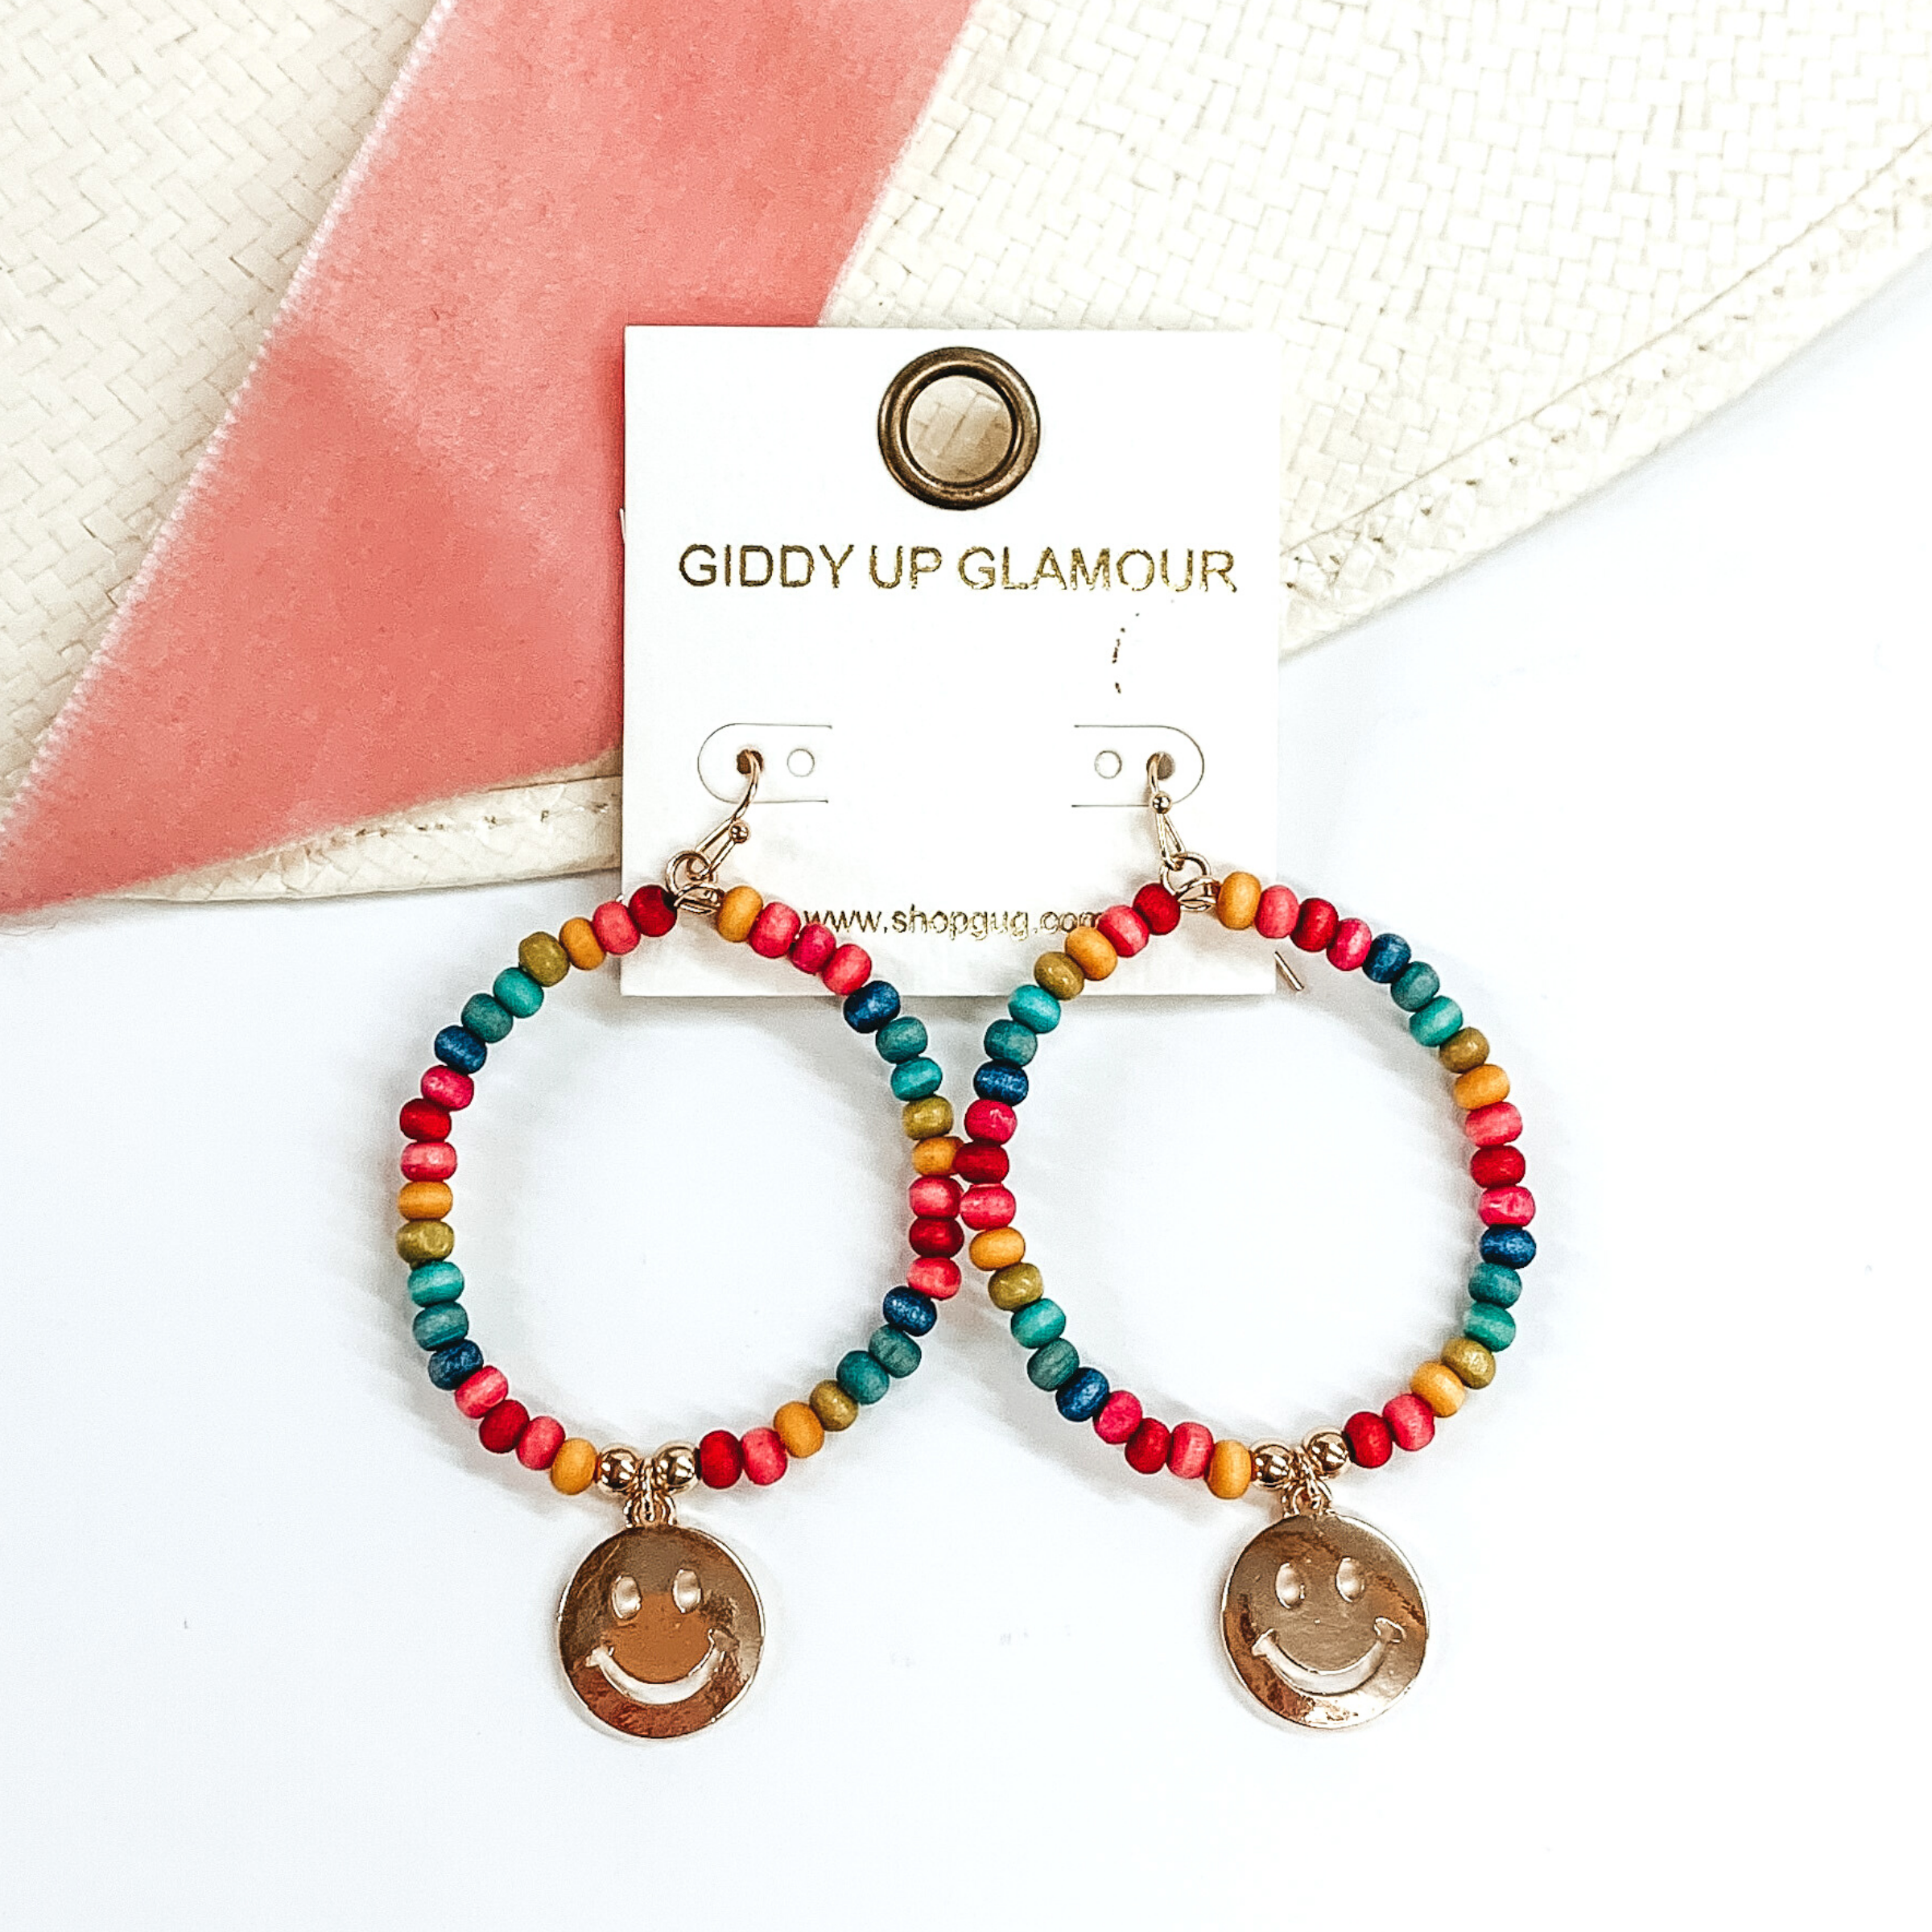 Circle drop earrings covered in multicolored beads. These is a hanging smiley face charm in gold. These earrings are picture laying partially on a straw hat and pink velvet strip on a white background.